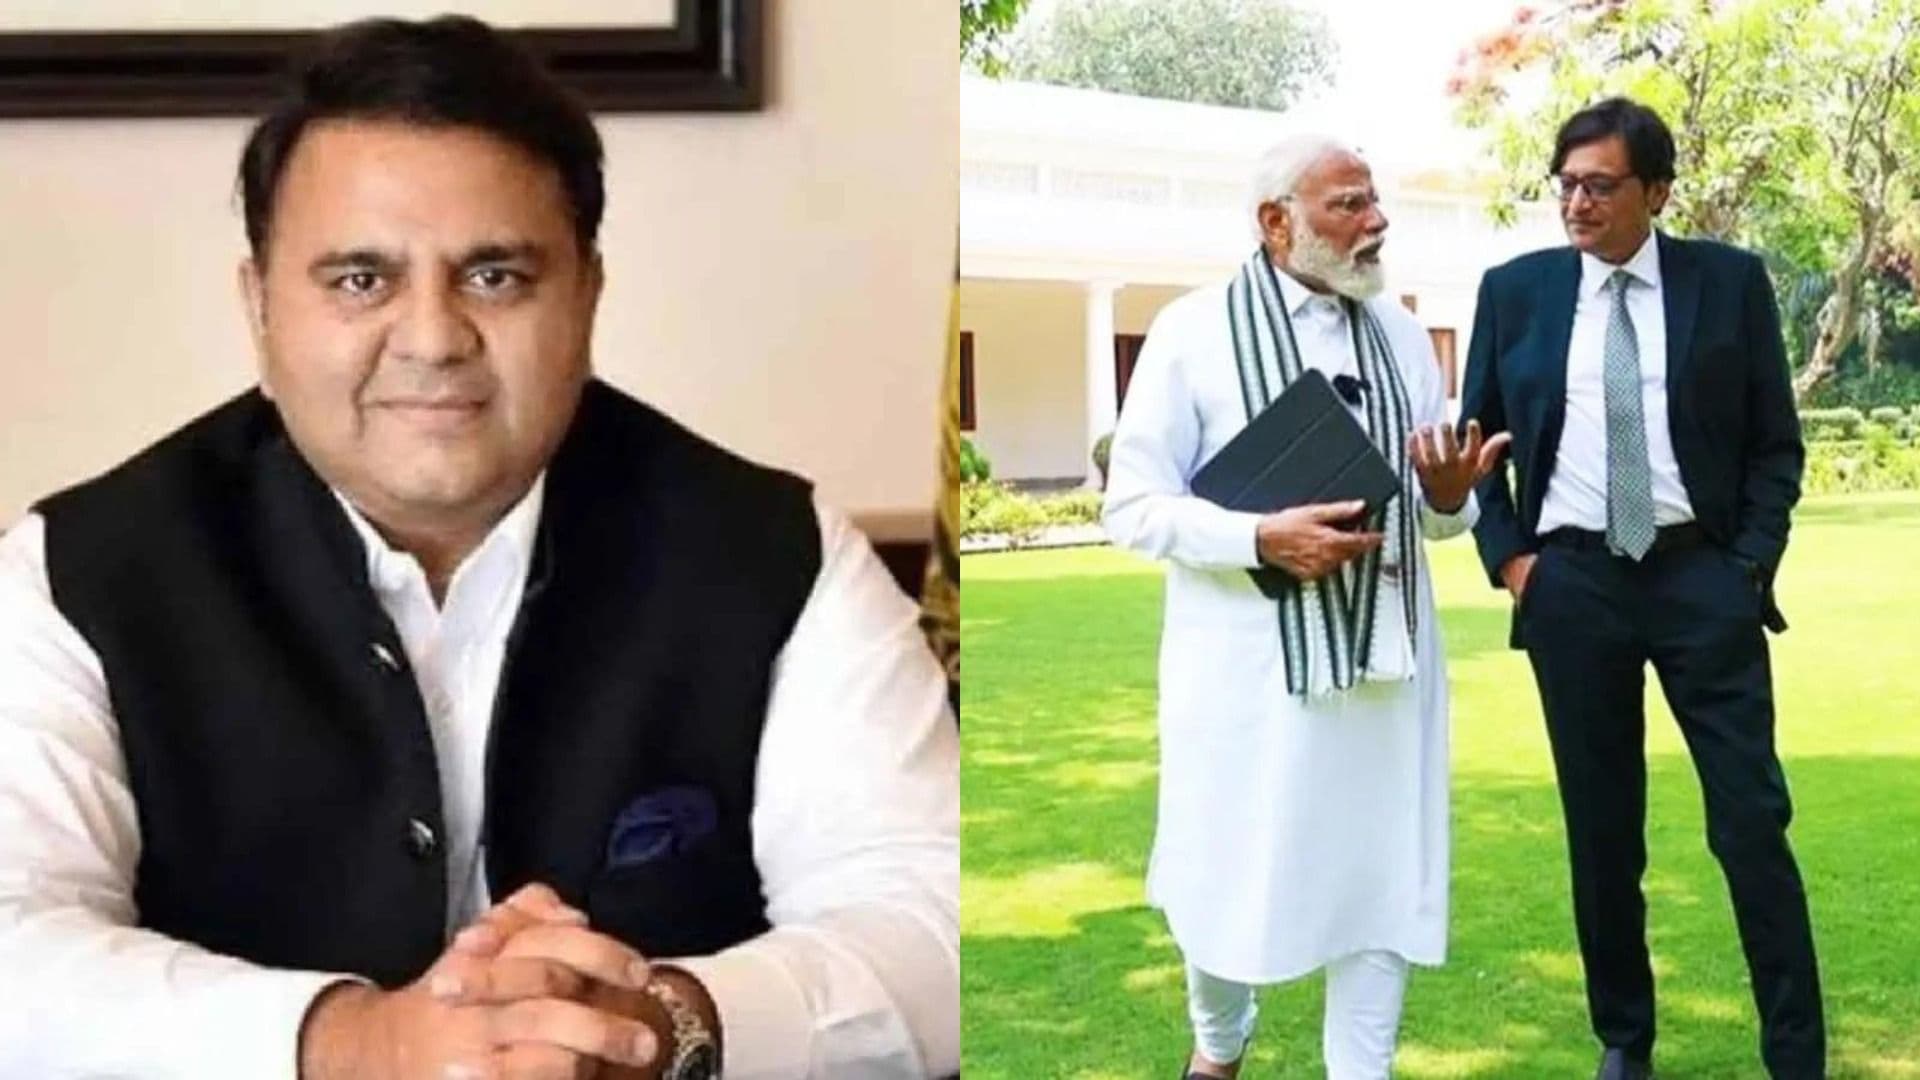 'Good Relations With Pakistan Means...': Fawad Chaudhry Reacts on PM's Interview With Arnab